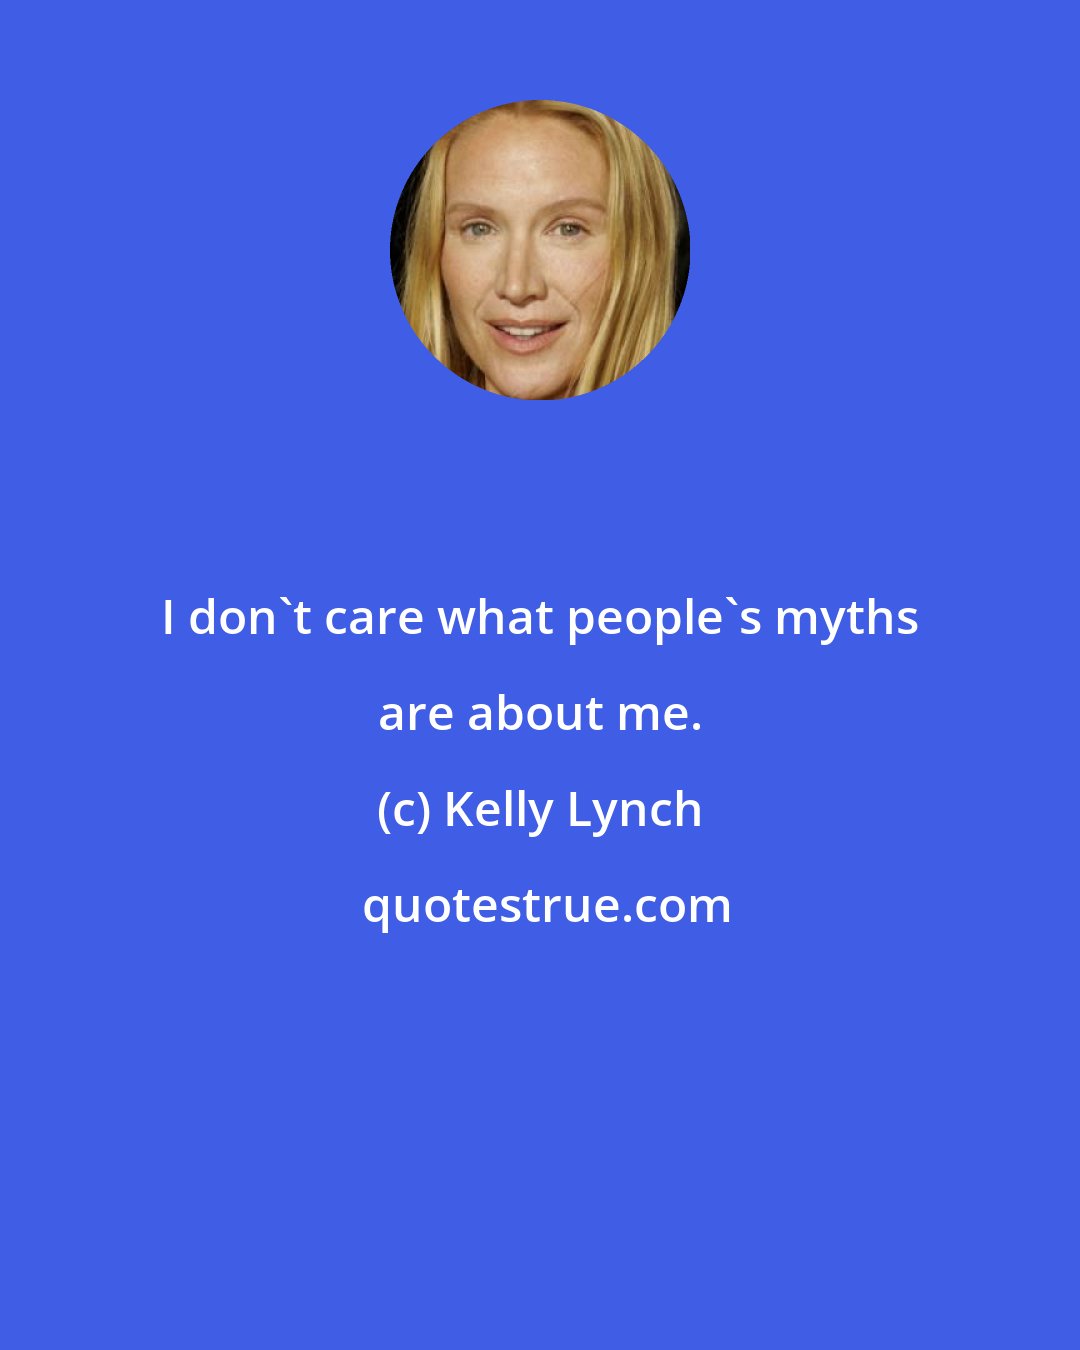 Kelly Lynch: I don't care what people's myths are about me.